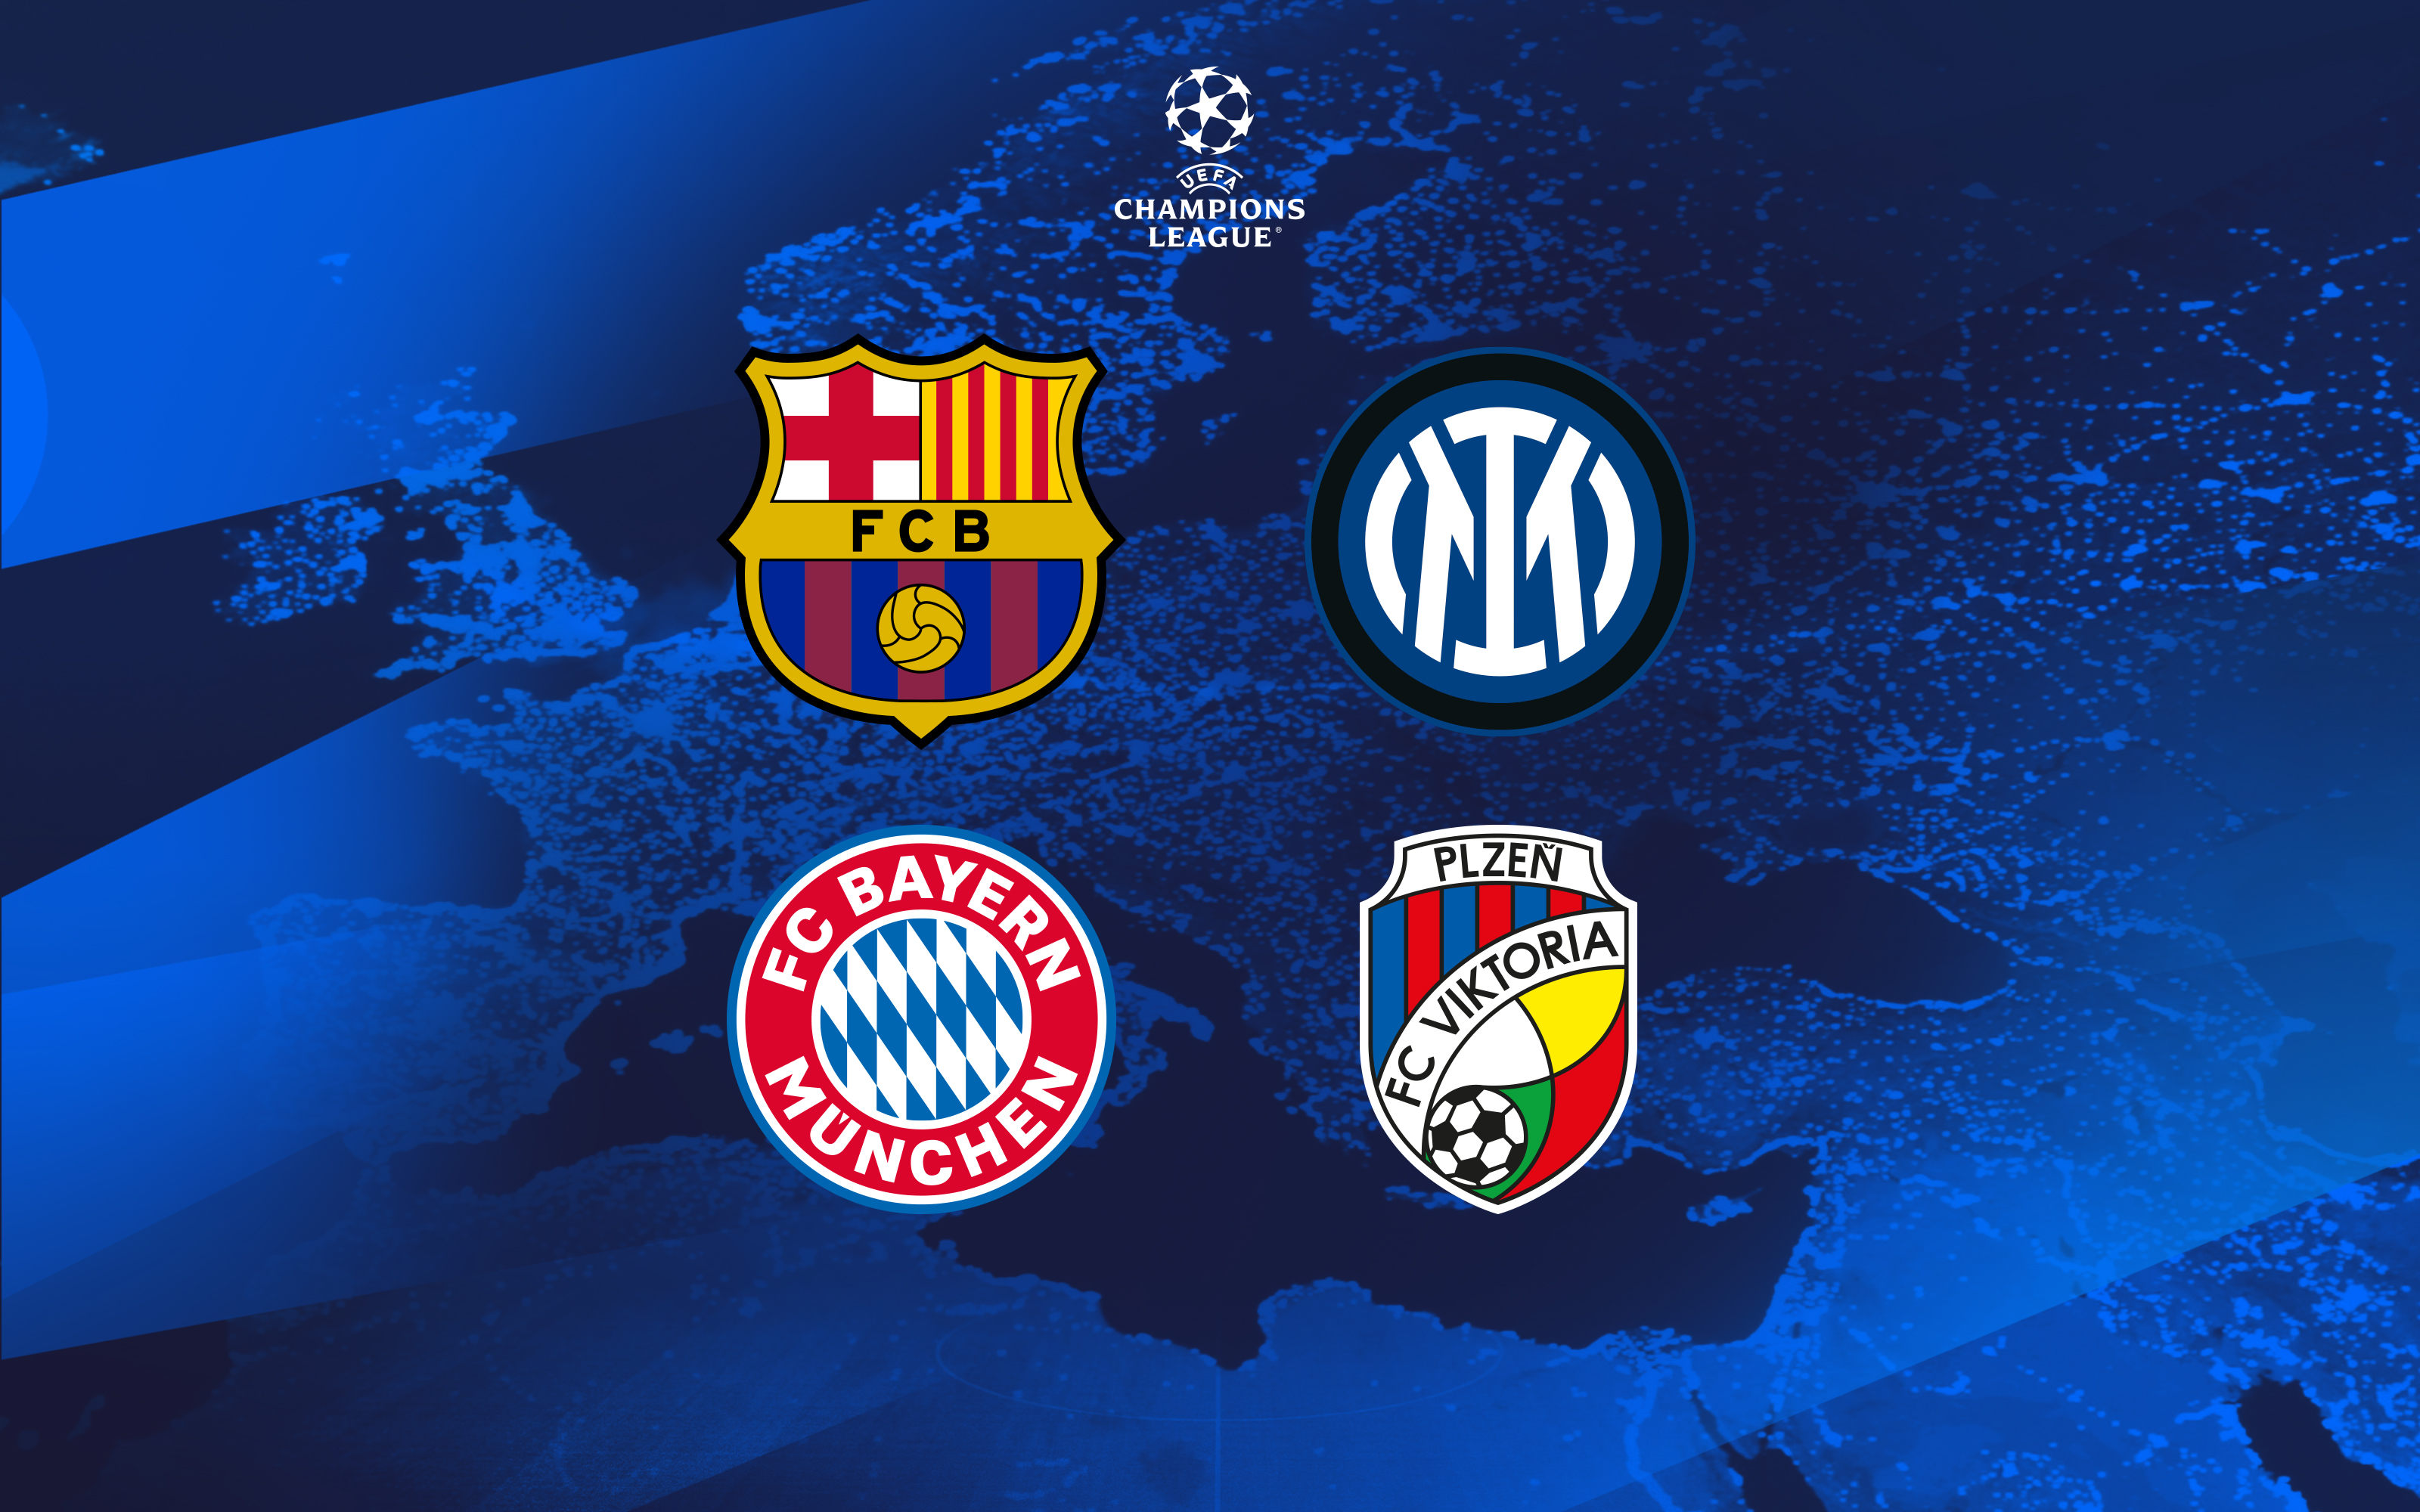 FC Barcelona 2022/23 Champion League group stage opponents revealed